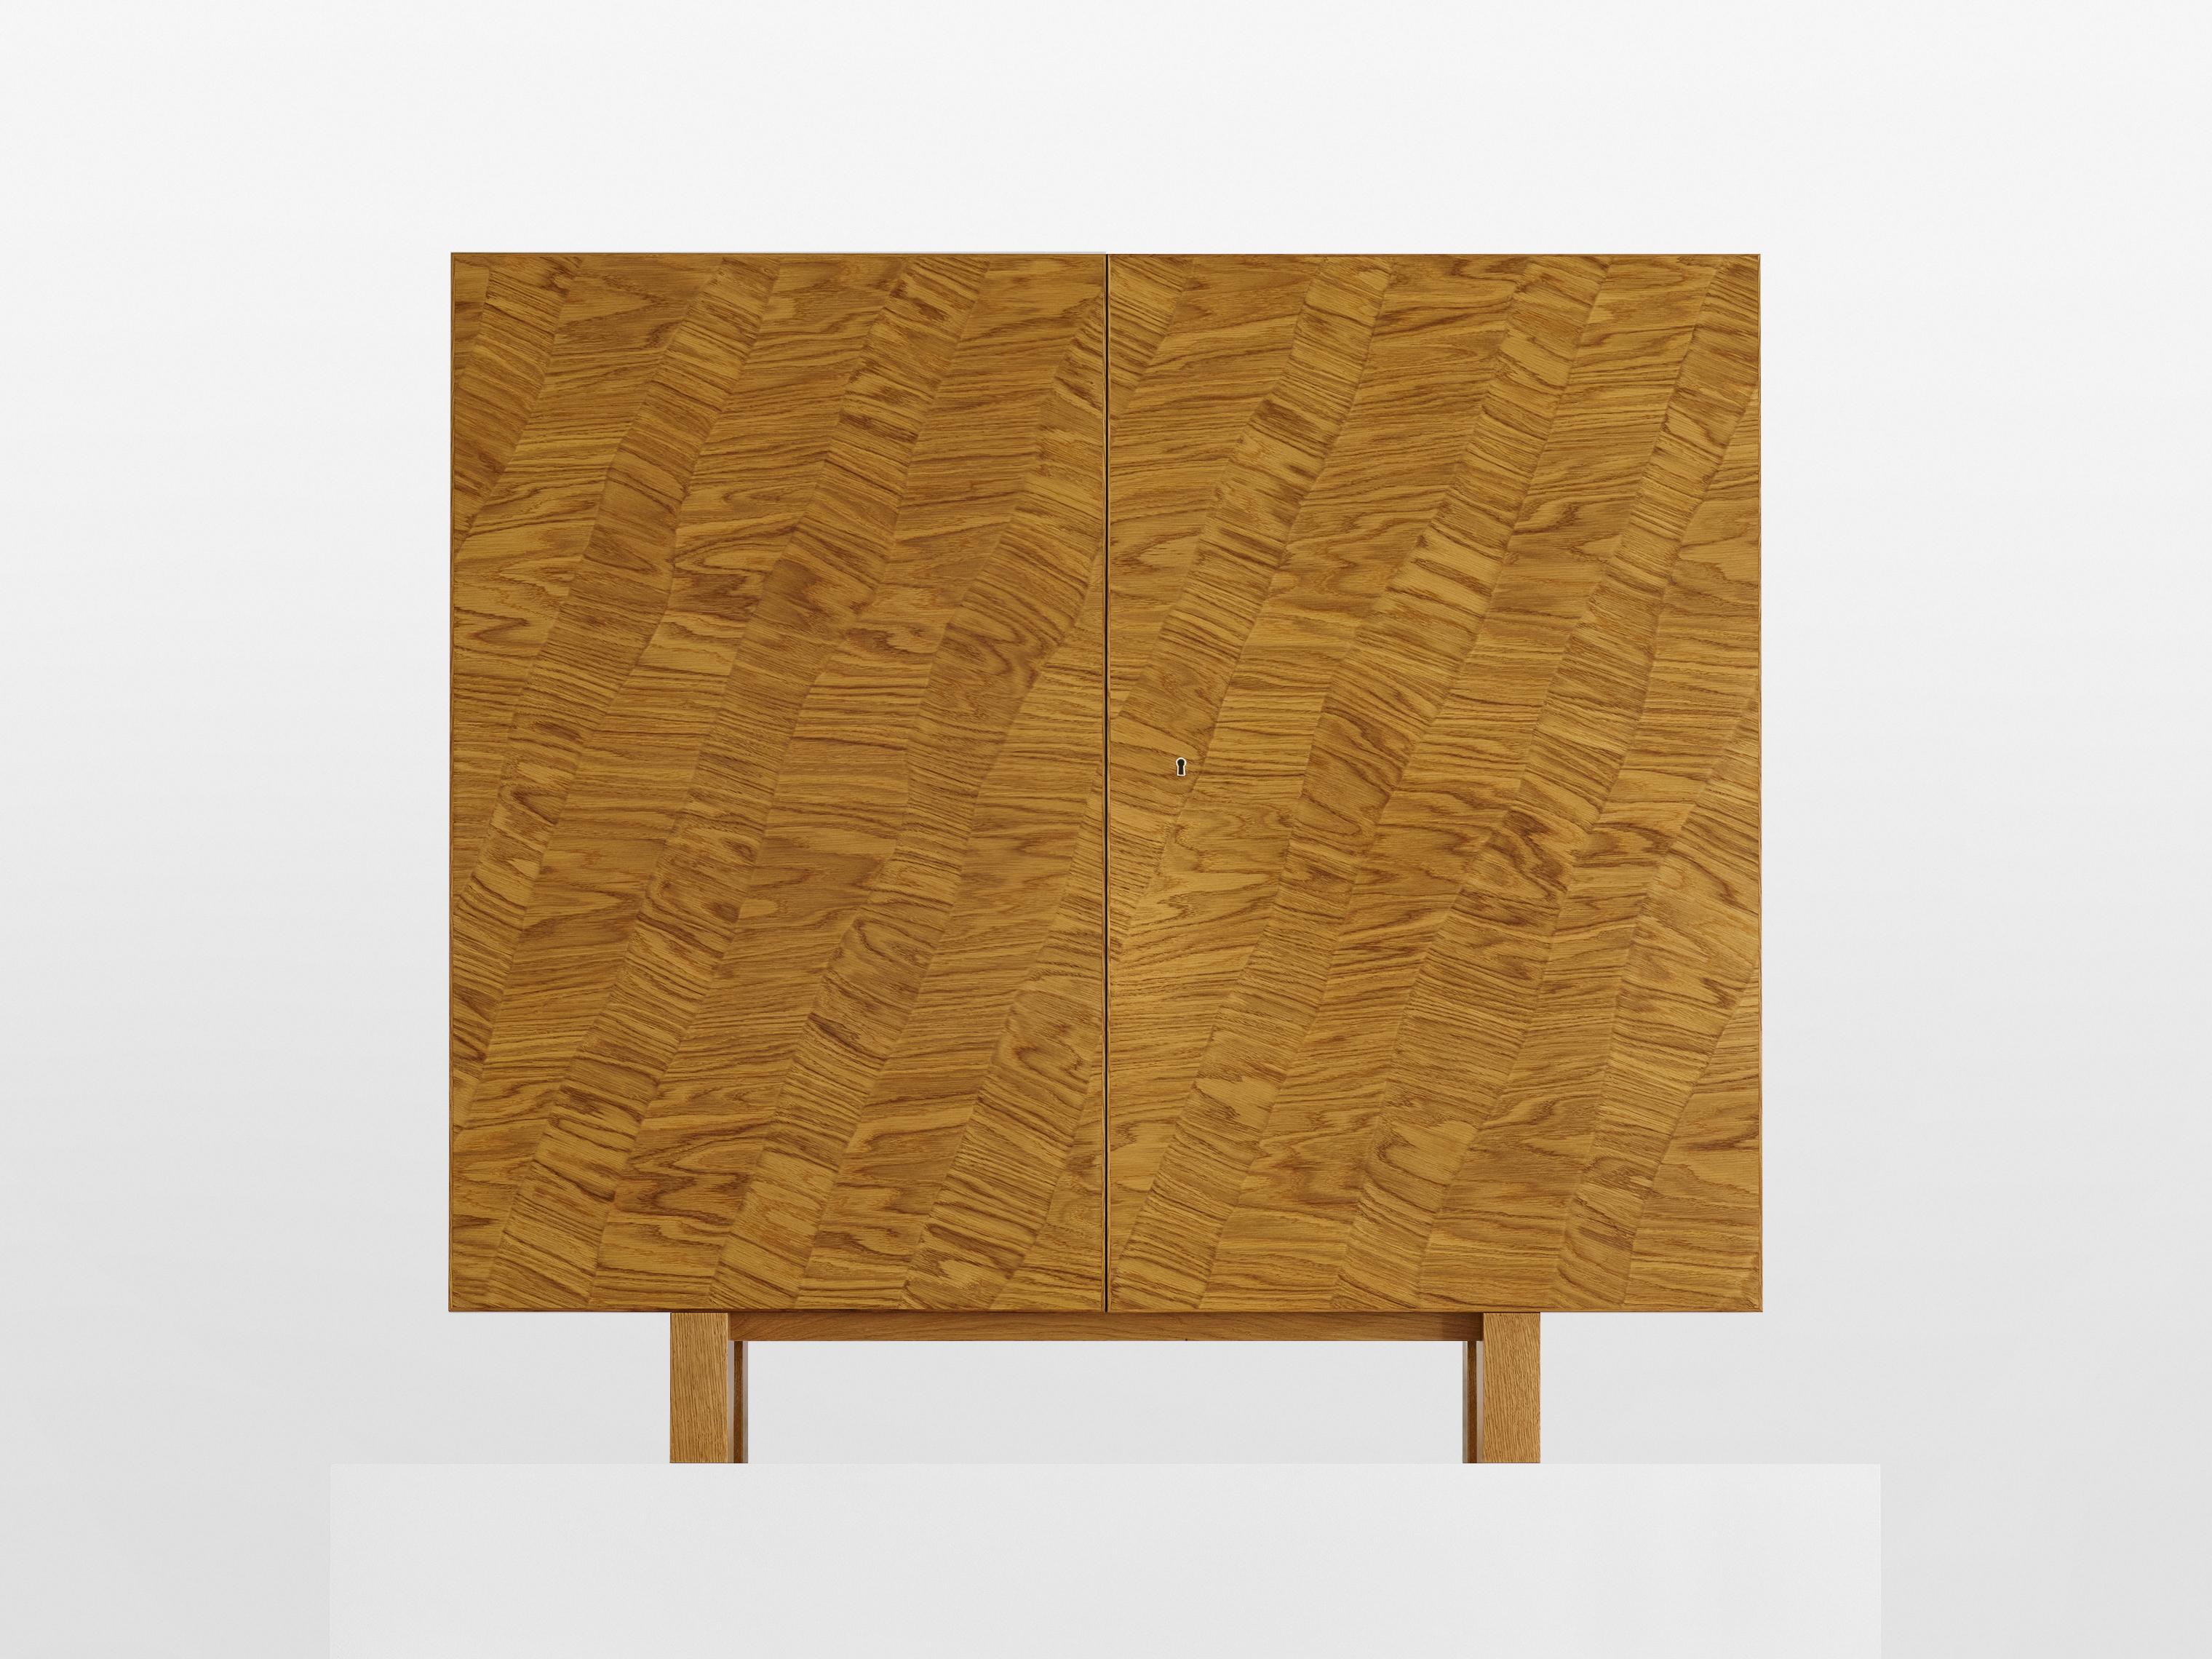 Strata Cabinet by SNICKERIET
Dimensions: D 40 x W 125 x H 115,7 cm. 
Materials: Oak veneer, solid oak, lacquer and wax.

Smaller size adjustments are accepted without additional cost. Larger
adjustments can be discussed as long as the furniture